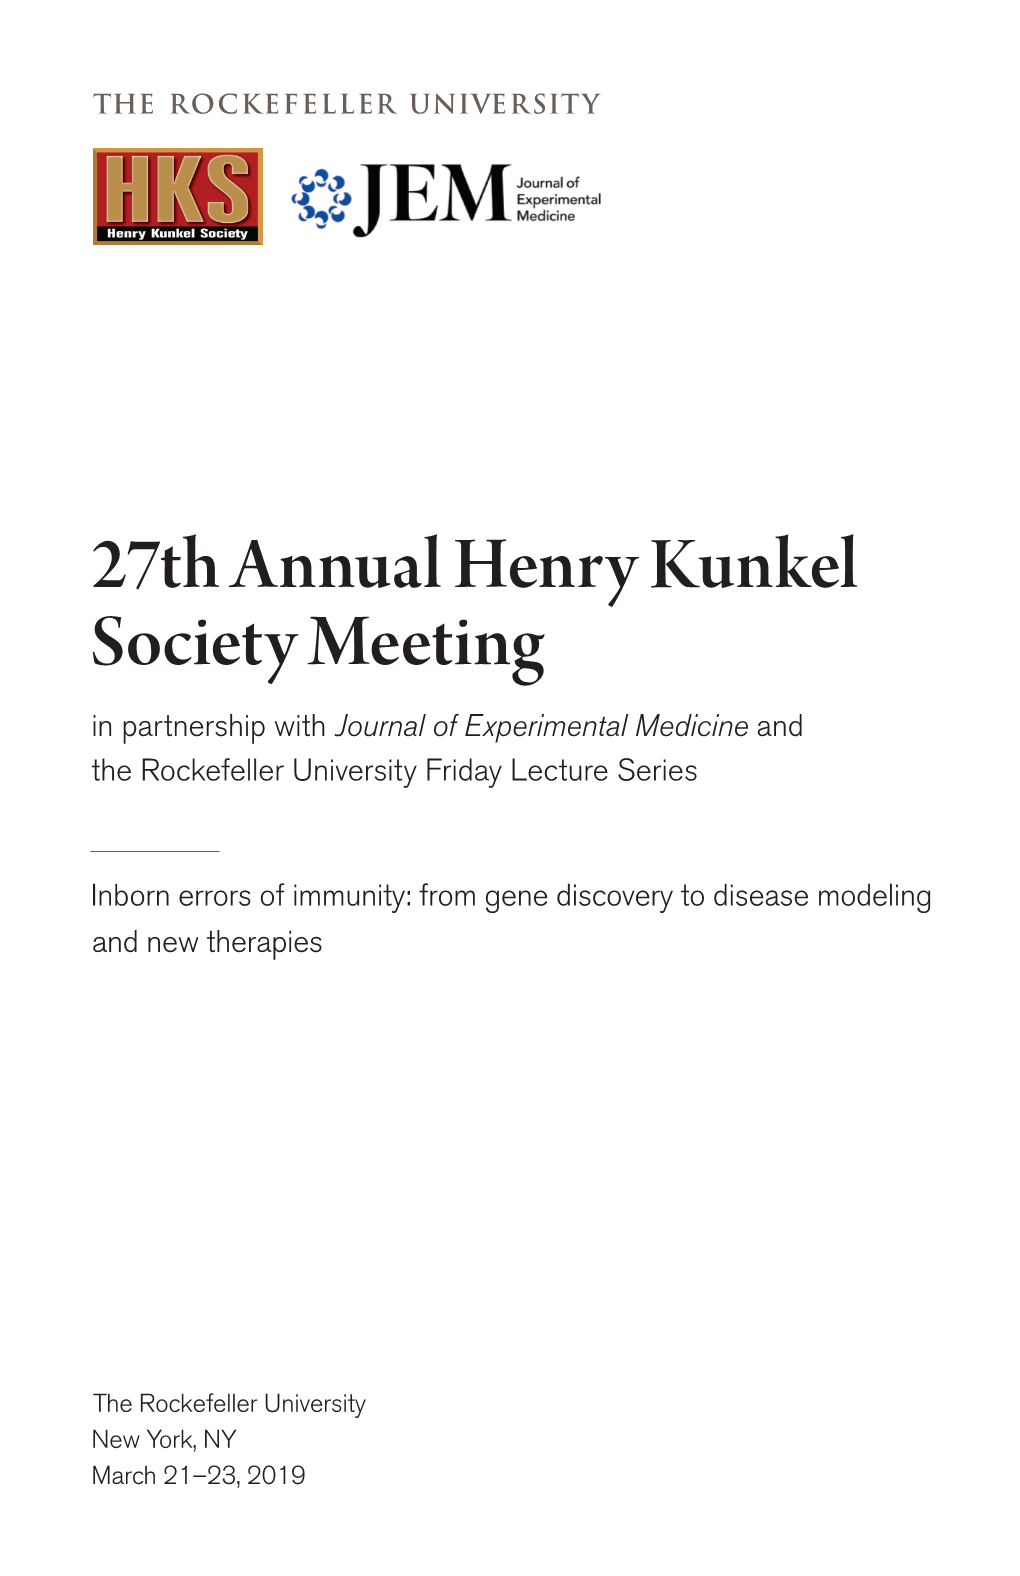 27Th Annual Henry Kunkel Society Meeting in Partnership with Journal of Experimental Medicine and the Rockefeller University Friday Lecture Series